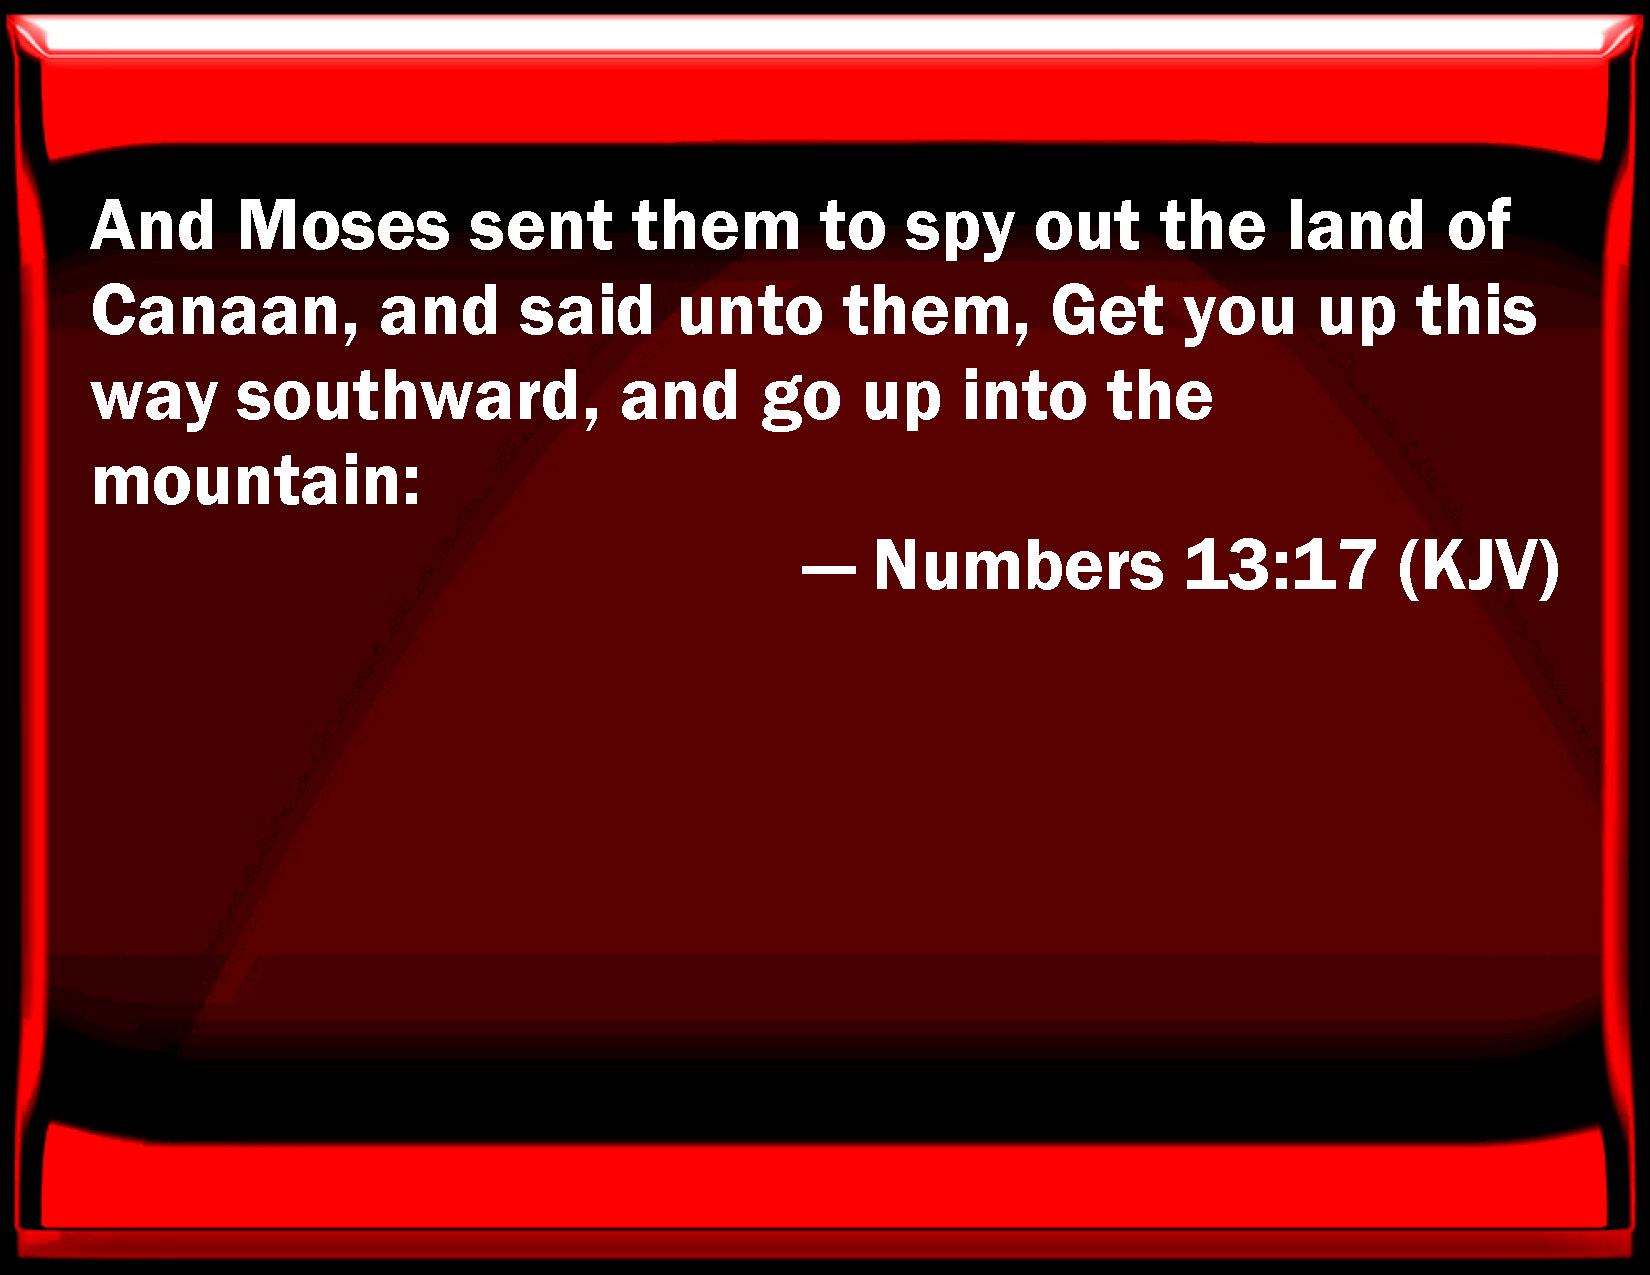 numbers-13-17-and-moses-sent-them-to-spy-out-the-land-of-canaan-and